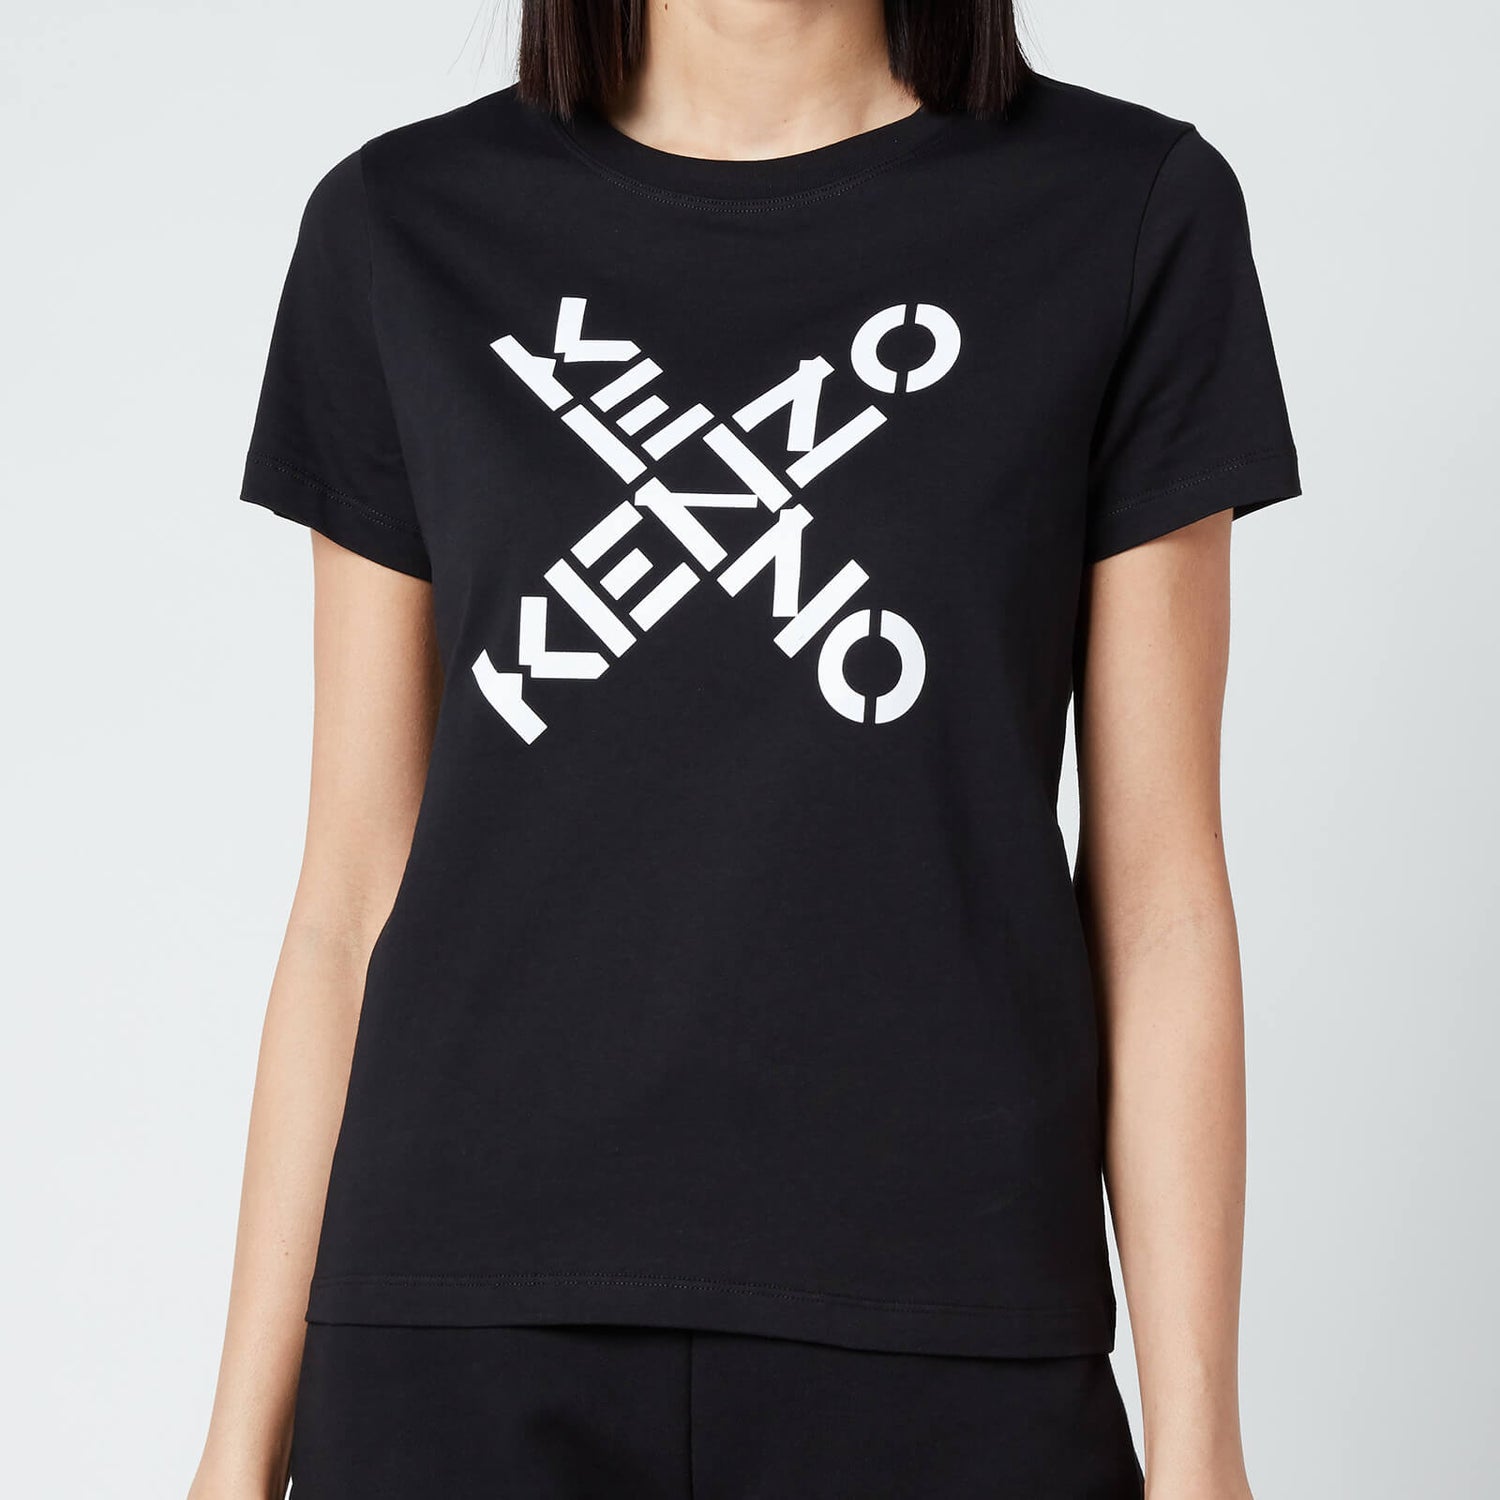 KENZO Women's Sport Classic T-Shirt - Black - Free UK Delivery Available